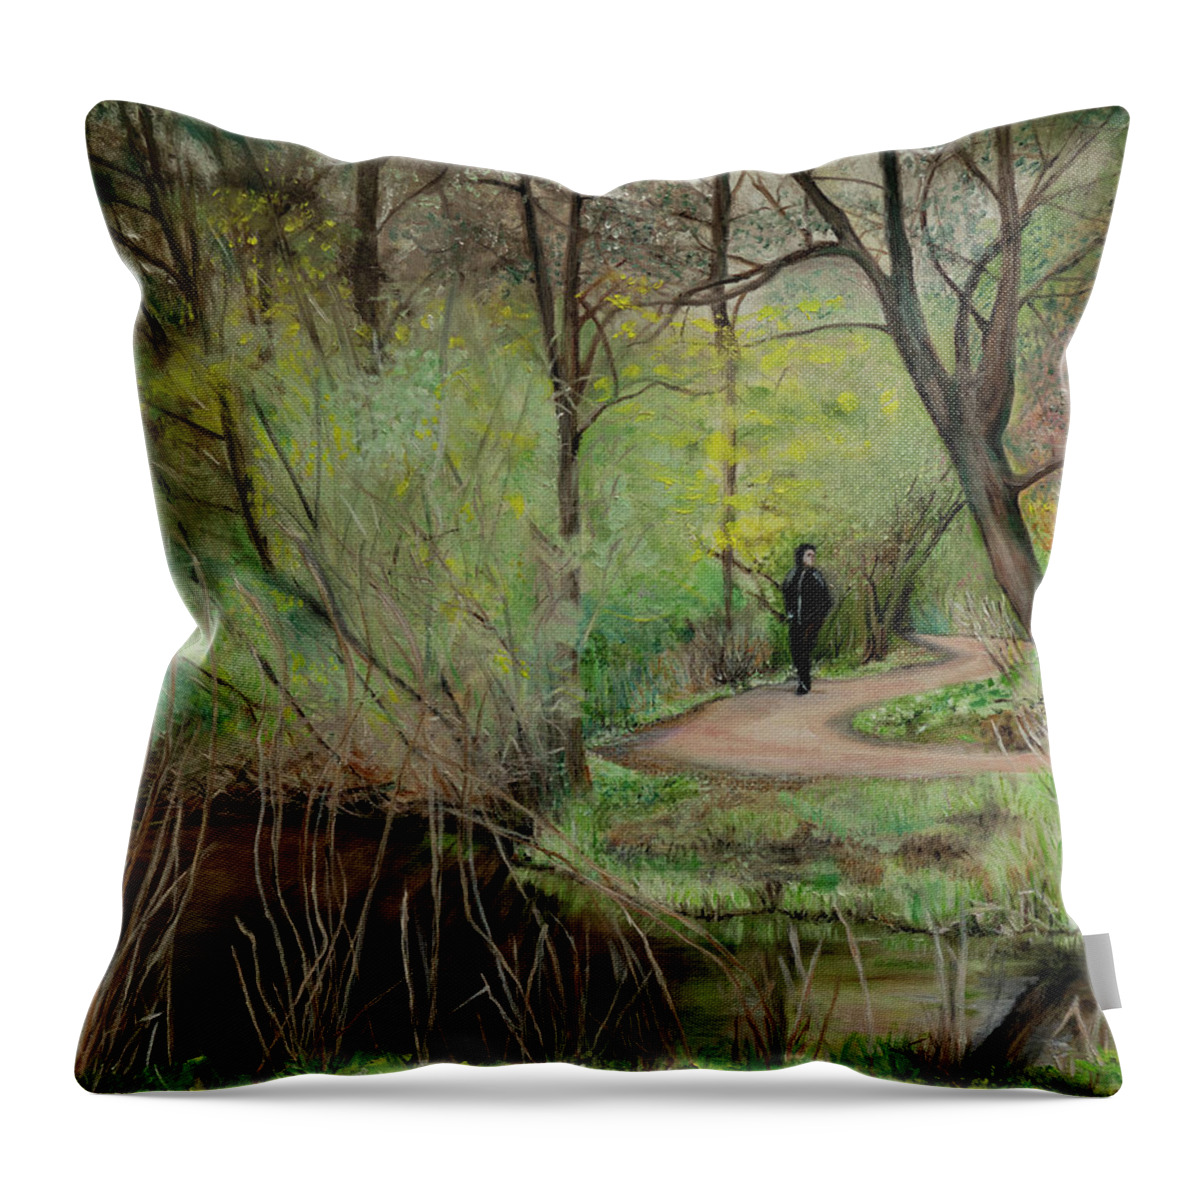 Inspiration Landscape Throw Pillow featuring the painting Vondelpark, Amsterdam by Kathy Knopp